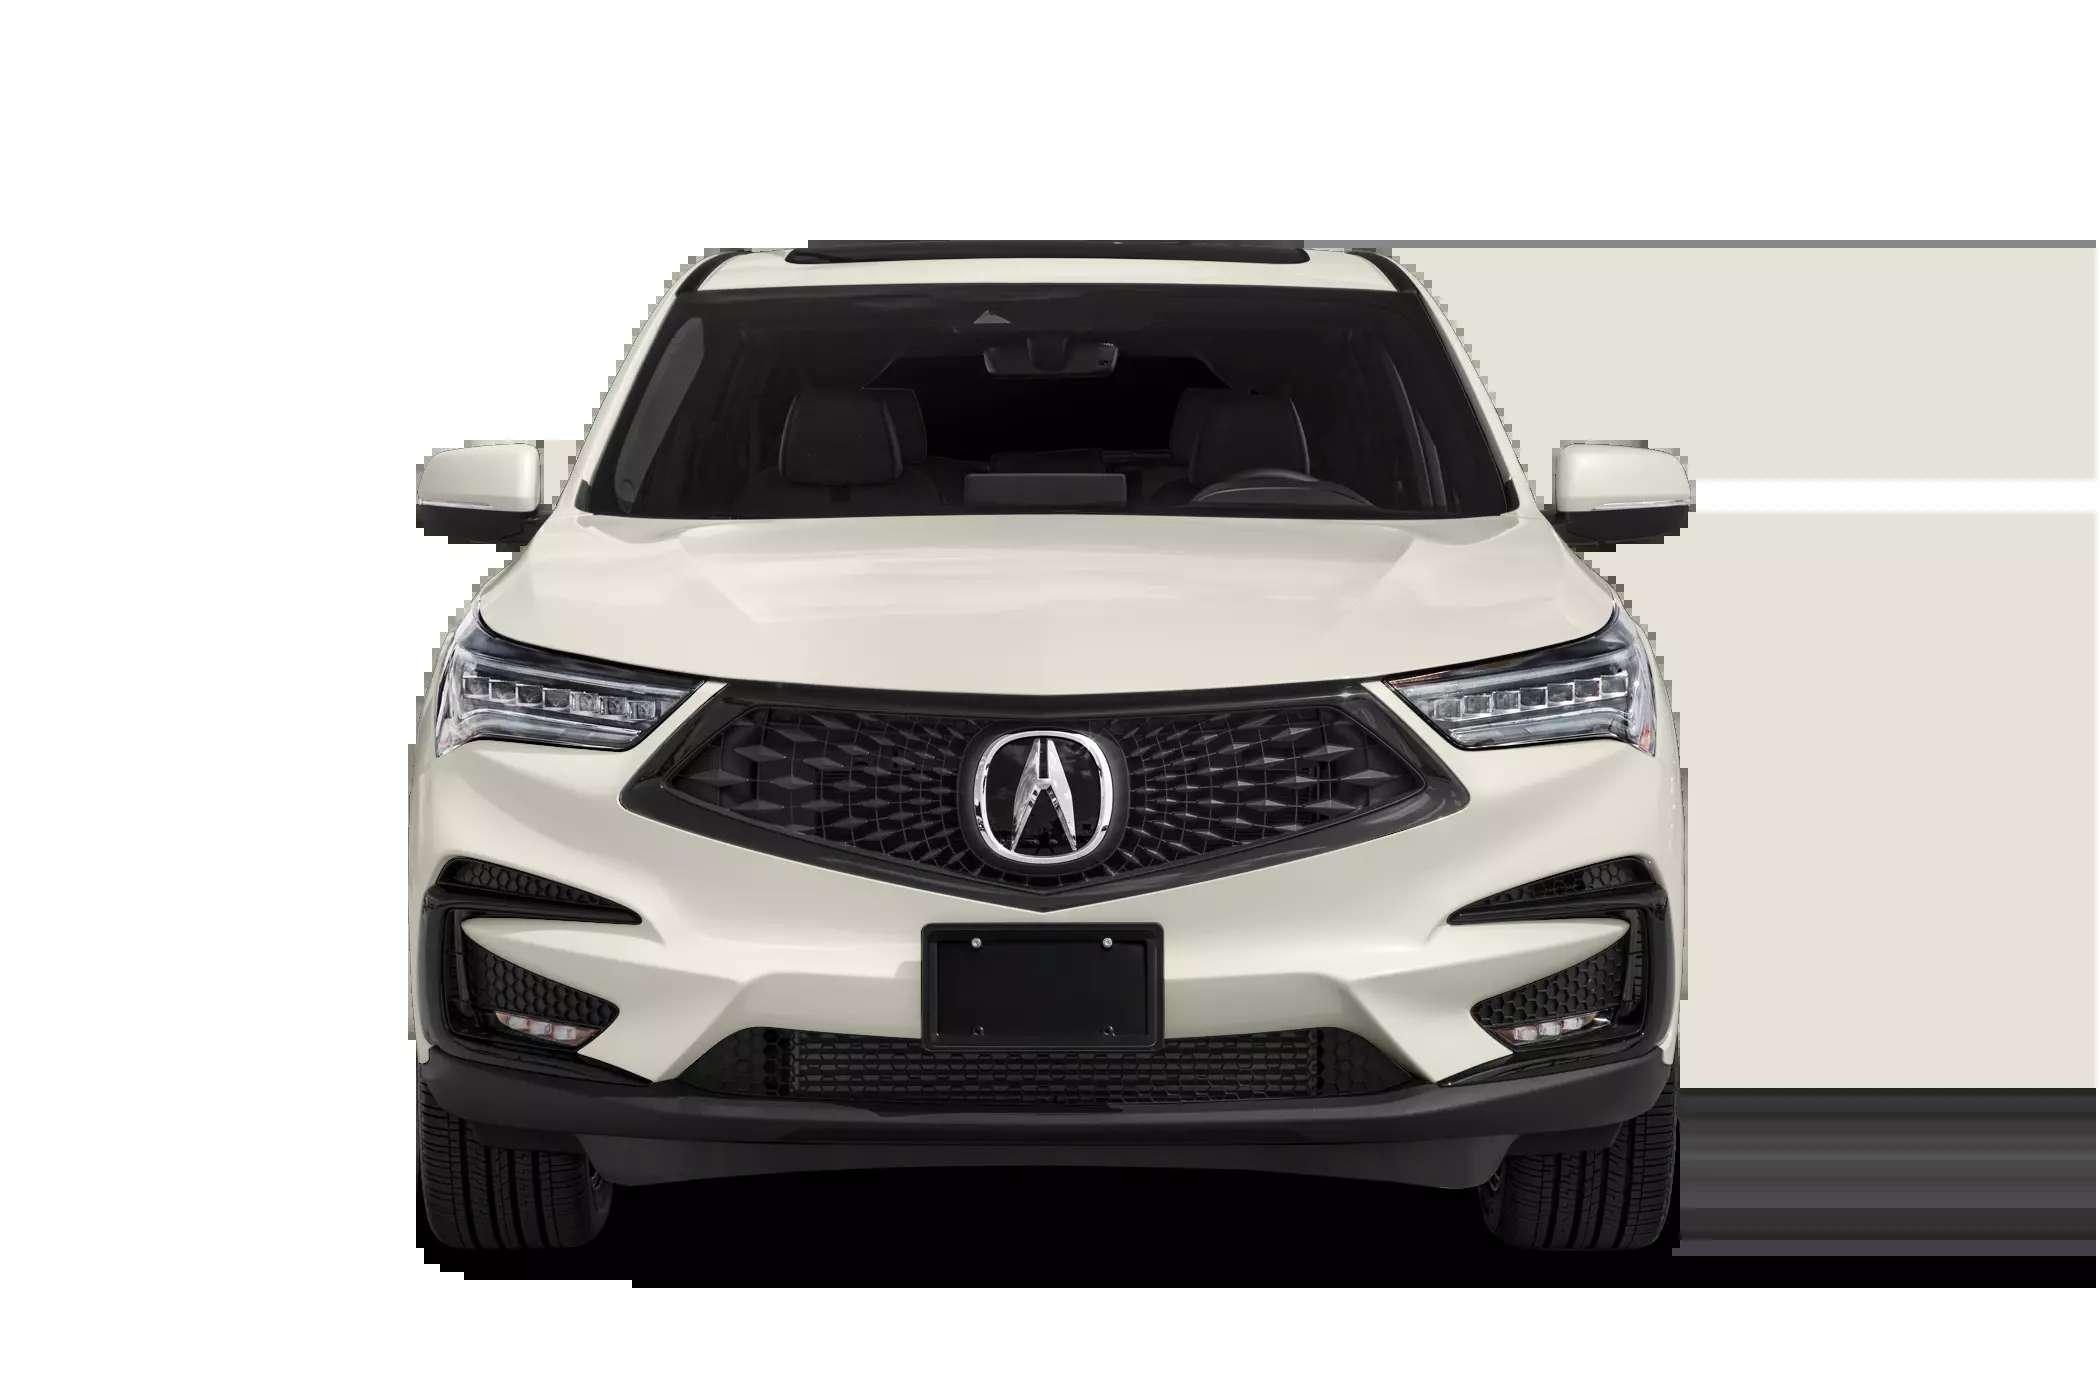 2021 Acura RDX Technology Package 060 Times, Top Speed, Specs, Quarter